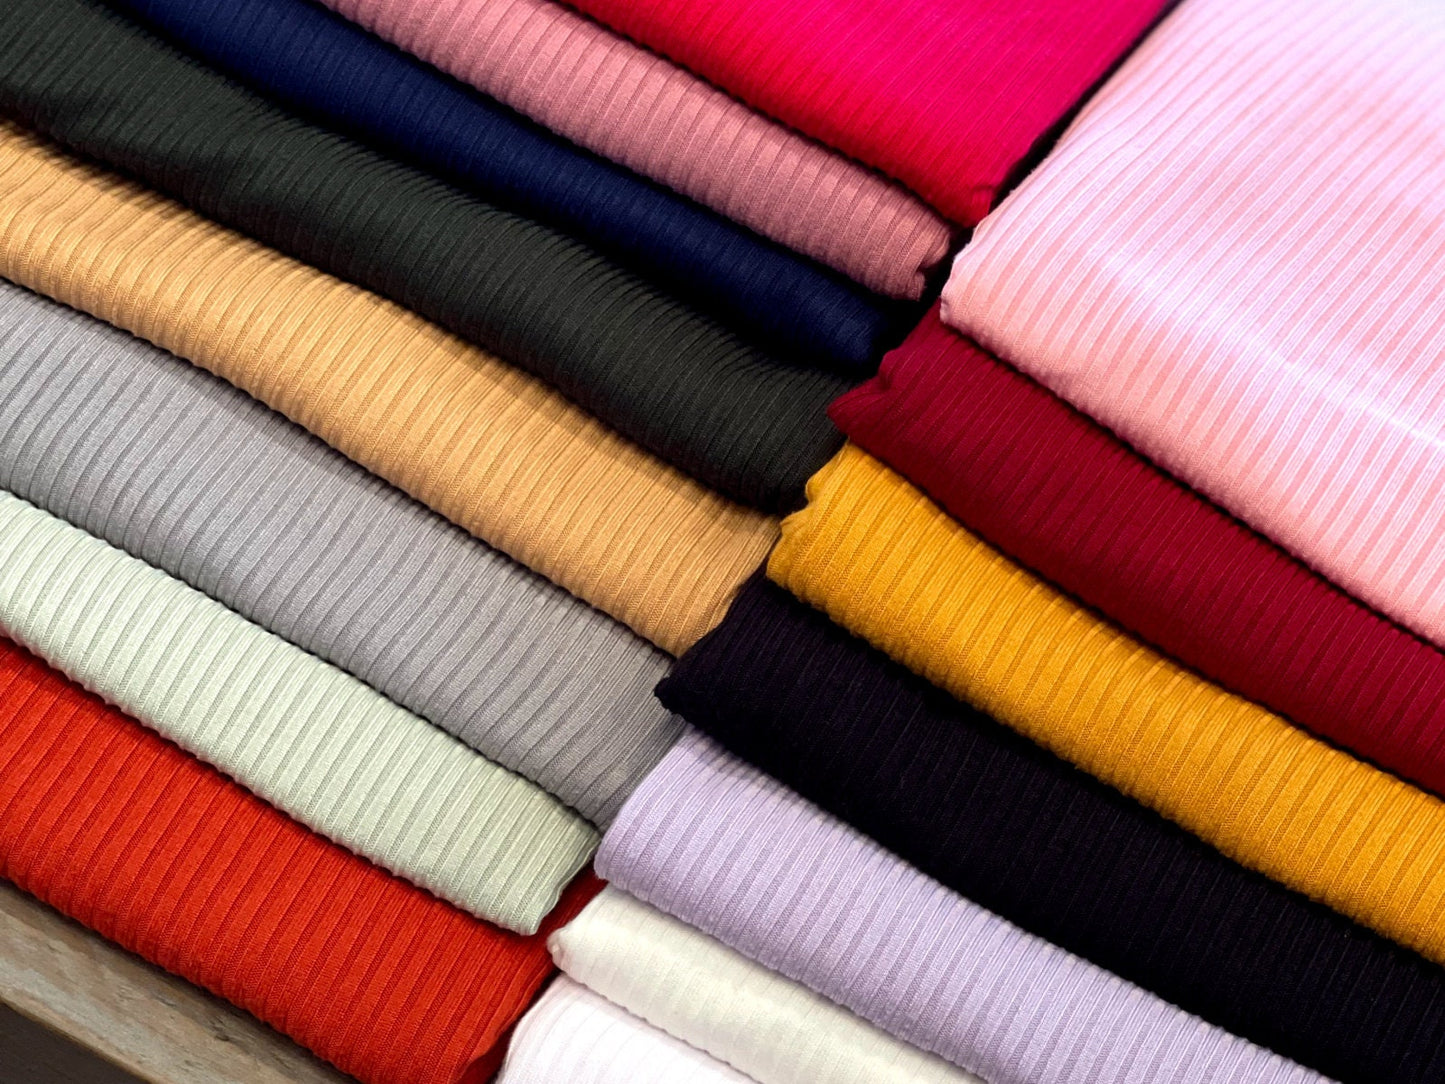 Mauve Rib Knit Fabric by the Yard Ribbed Jersey Stretchy Soft Polyester Stretch Fabric 1 Yard